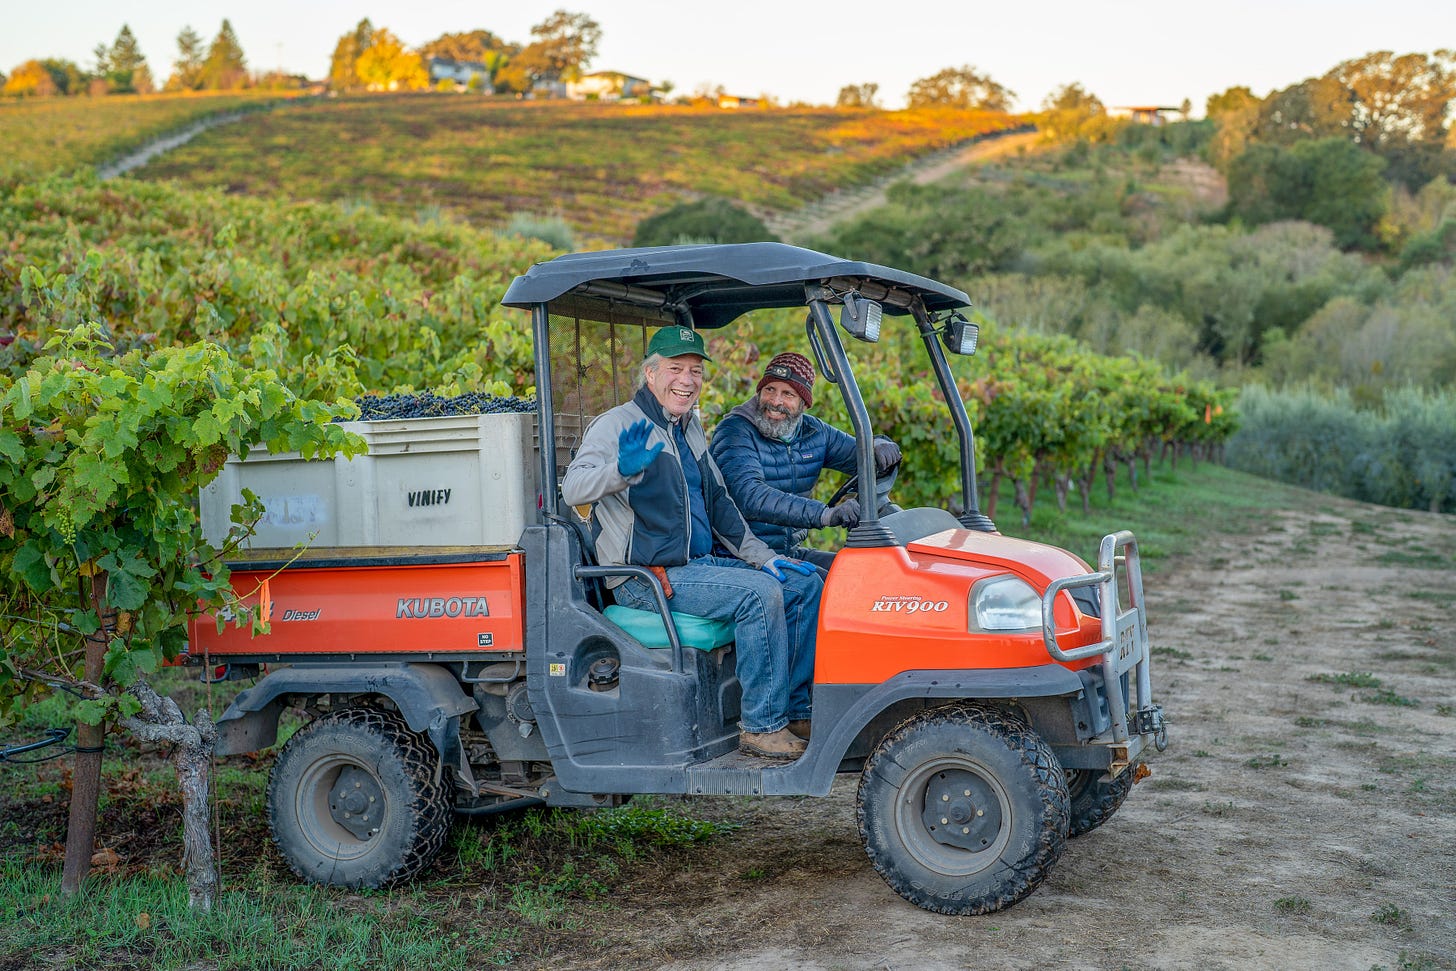 Stephen and Greg laughing from the vineyard tractor.